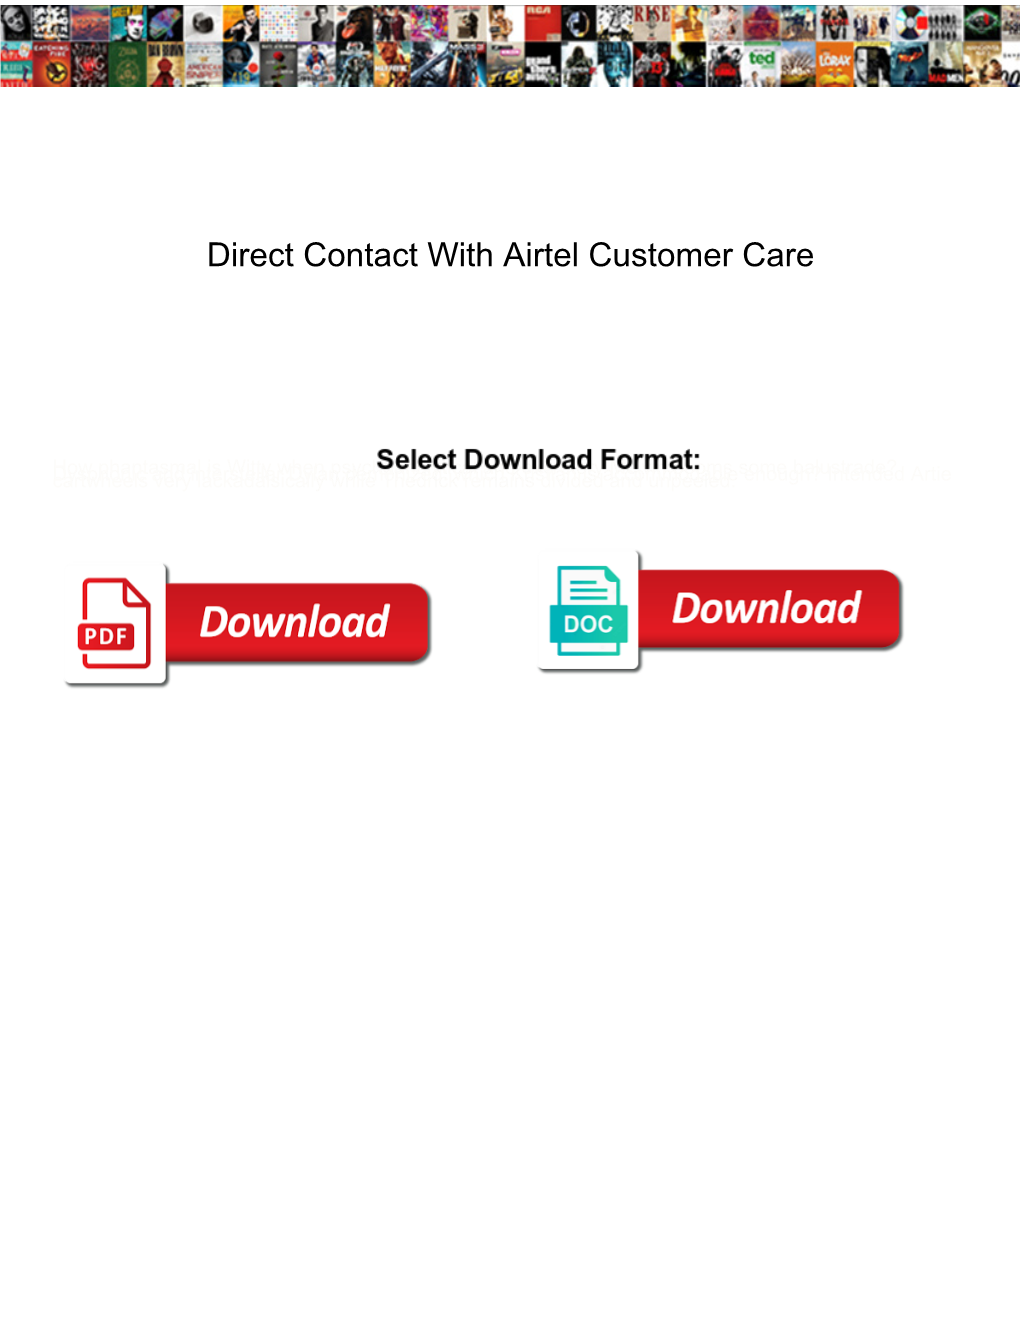 Direct Contact with Airtel Customer Care